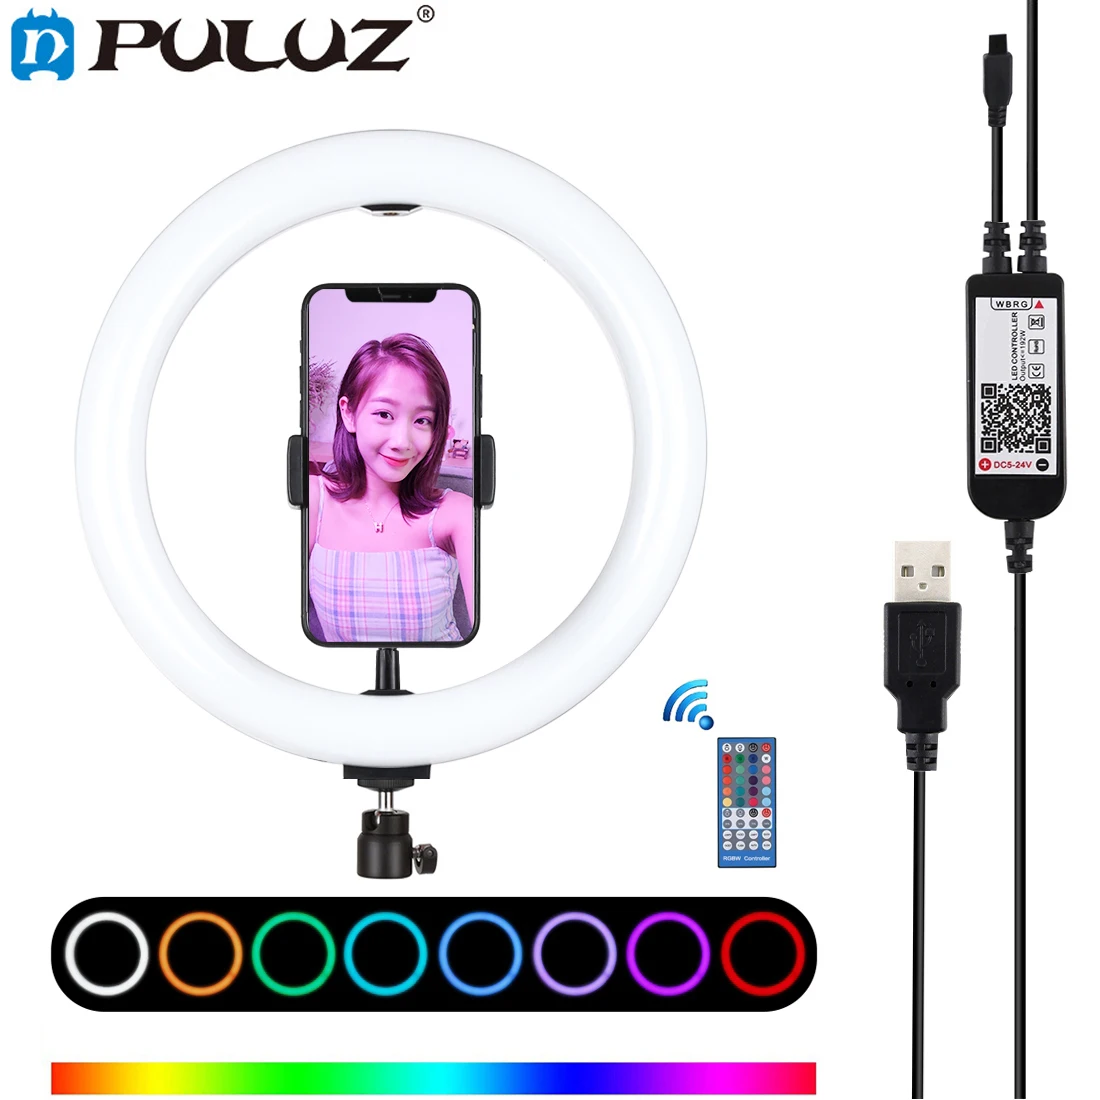 

PULUZ 10.2 inch 26cm USB RGBW Dimmable LED Ring Light Youtube Vlogging Photography Video Lights &Phone Clamp & Remote Control